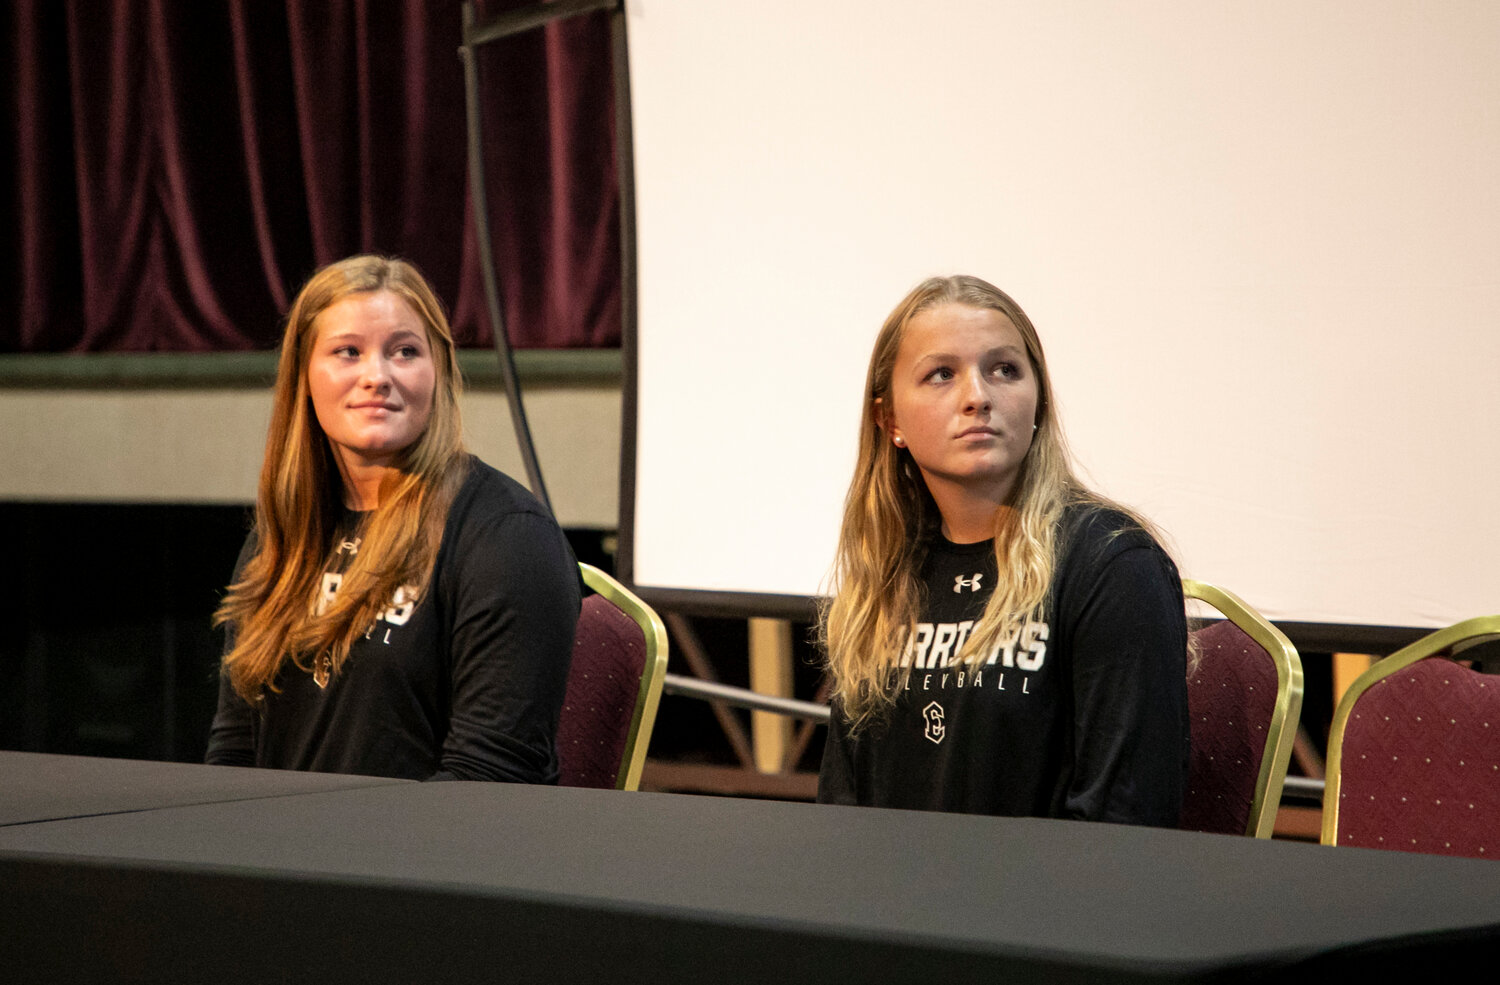 At Monday’s Volleyball Media Day at Trojan Hall in Daphne, the Elberta Warriors were represented by seniors Morgan Thrift and Haley Bingert who will look to execute the message from head coach Madison Wichterman to improve each day. Wichterman also said the pair of athletes are some of the main energy providers on the team.